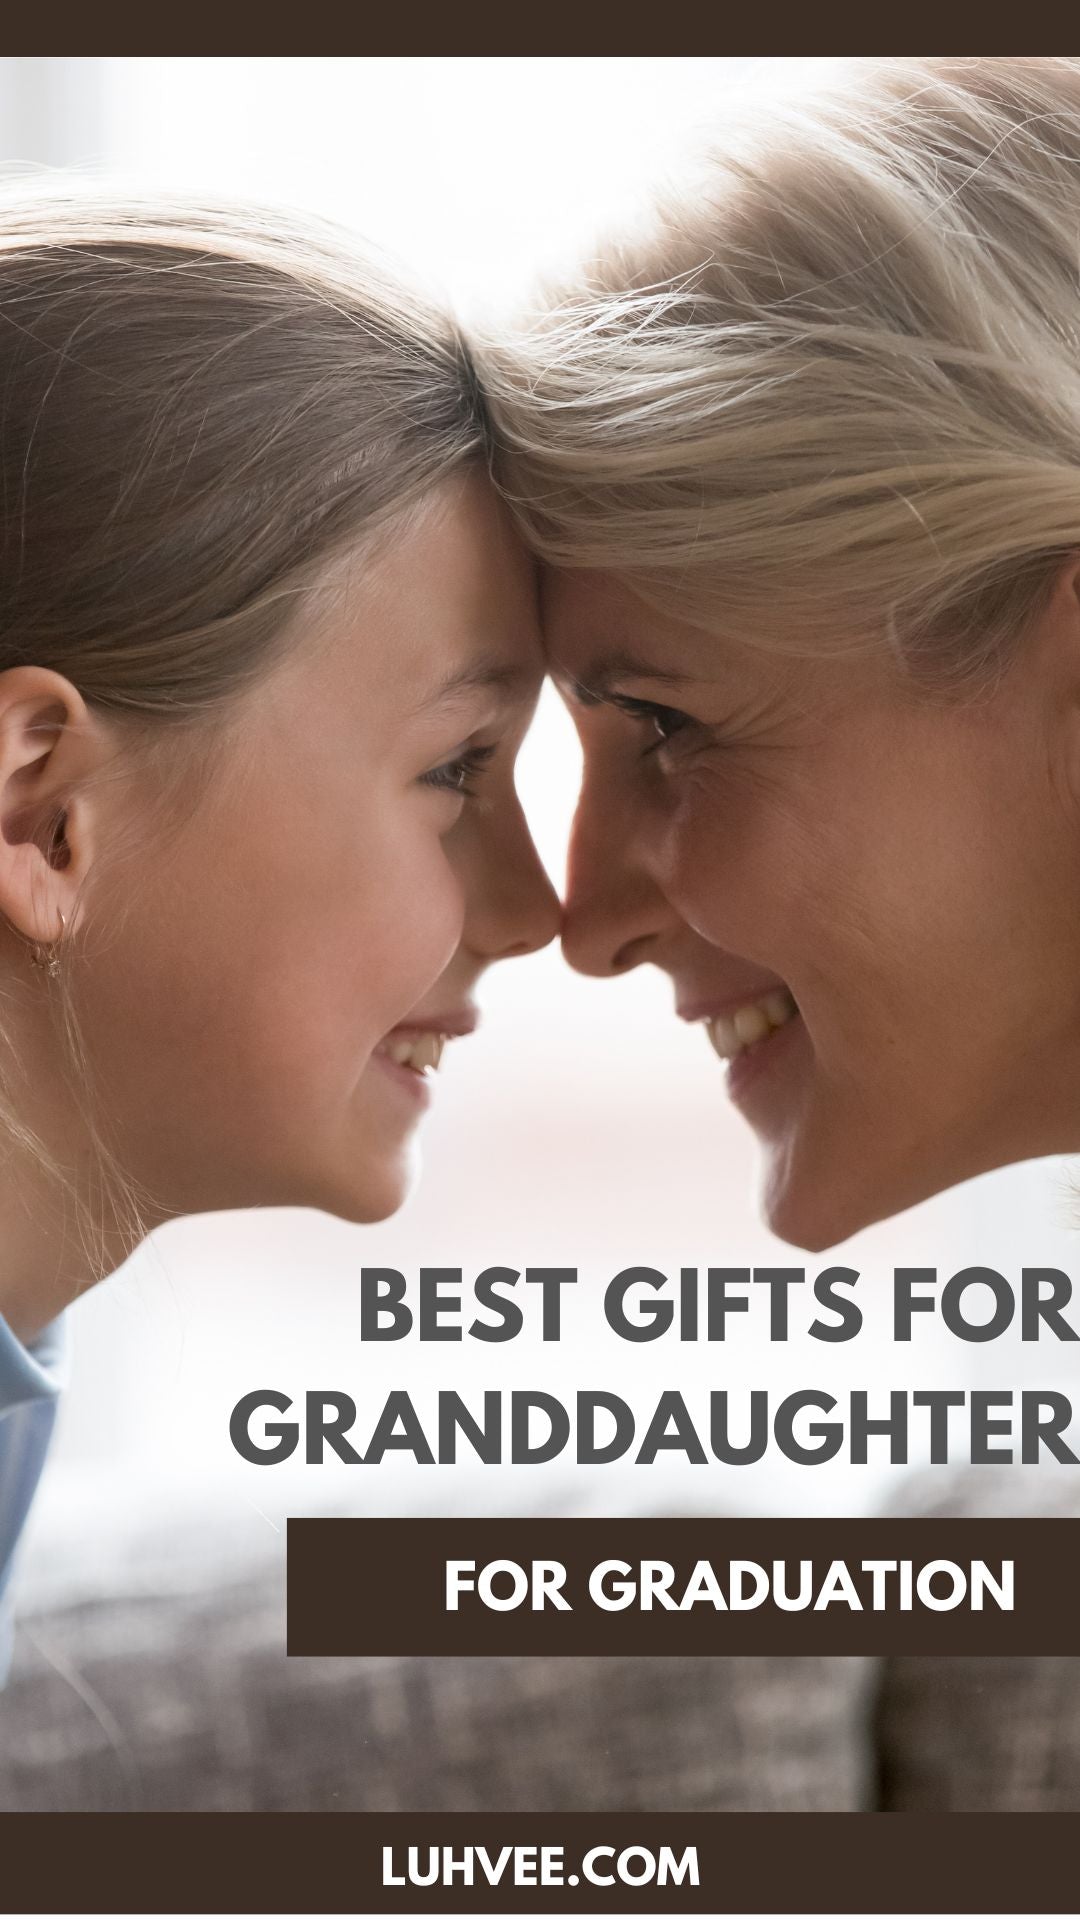 Best Graduation Gifts For Granddaughter From Grandparents